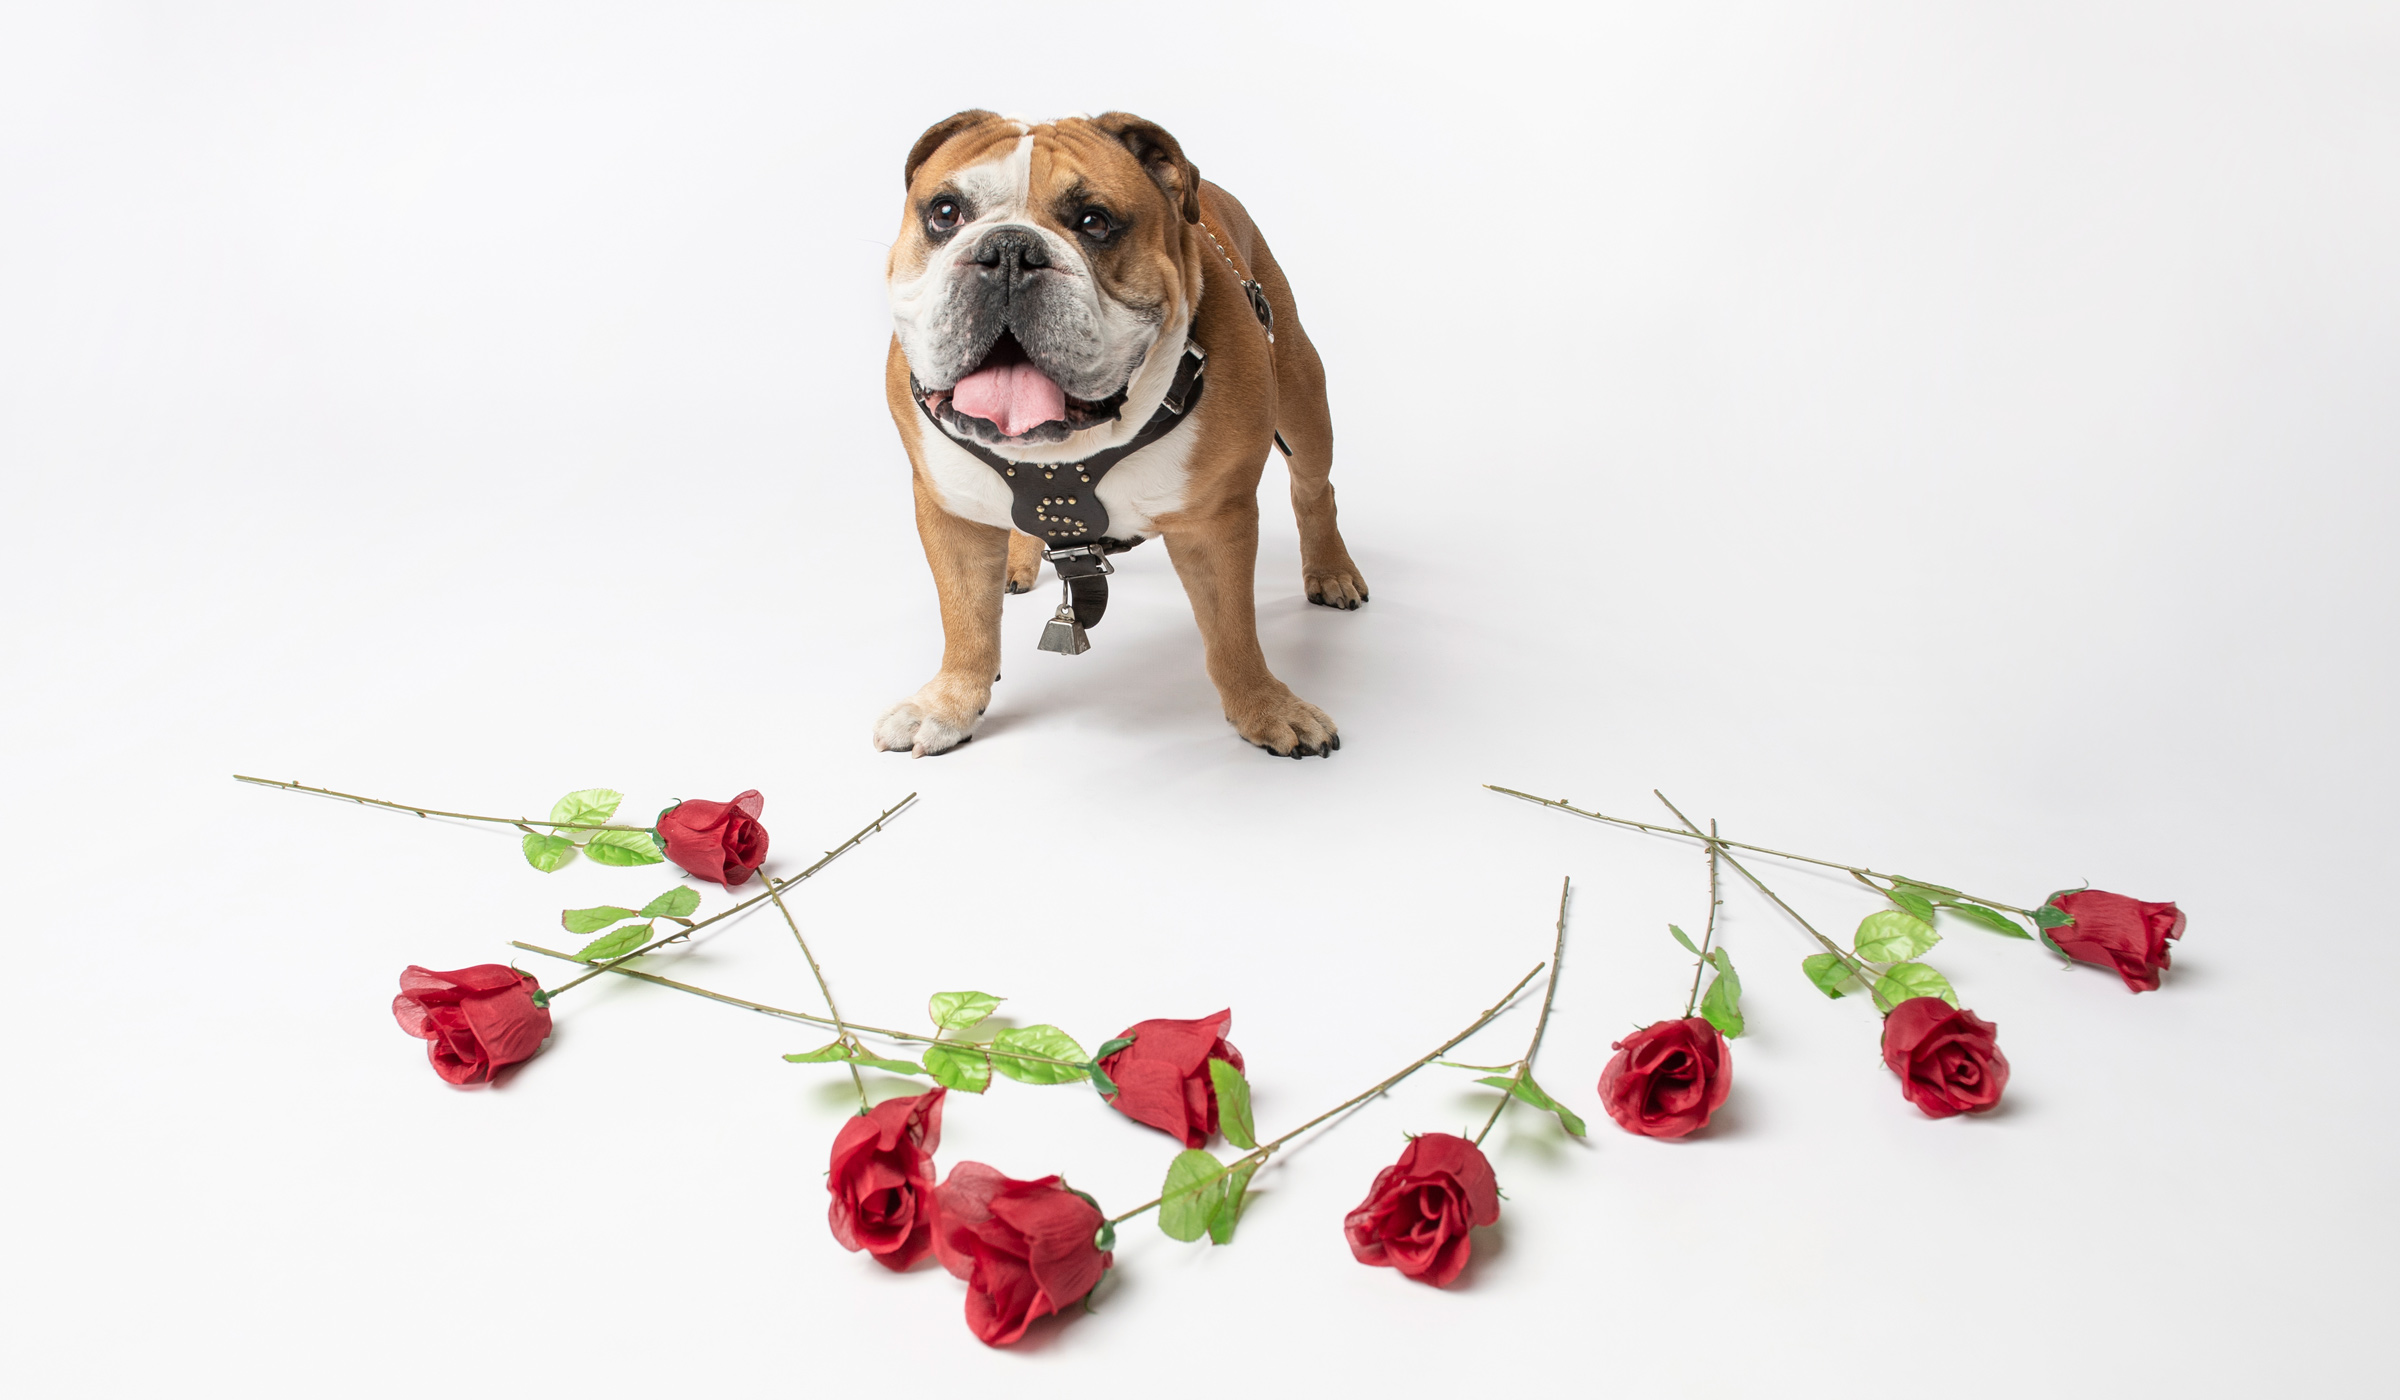 Bully XXI - Jak - looks up at the camera on a white studio backdrop, surrounded by a circle of red roses.